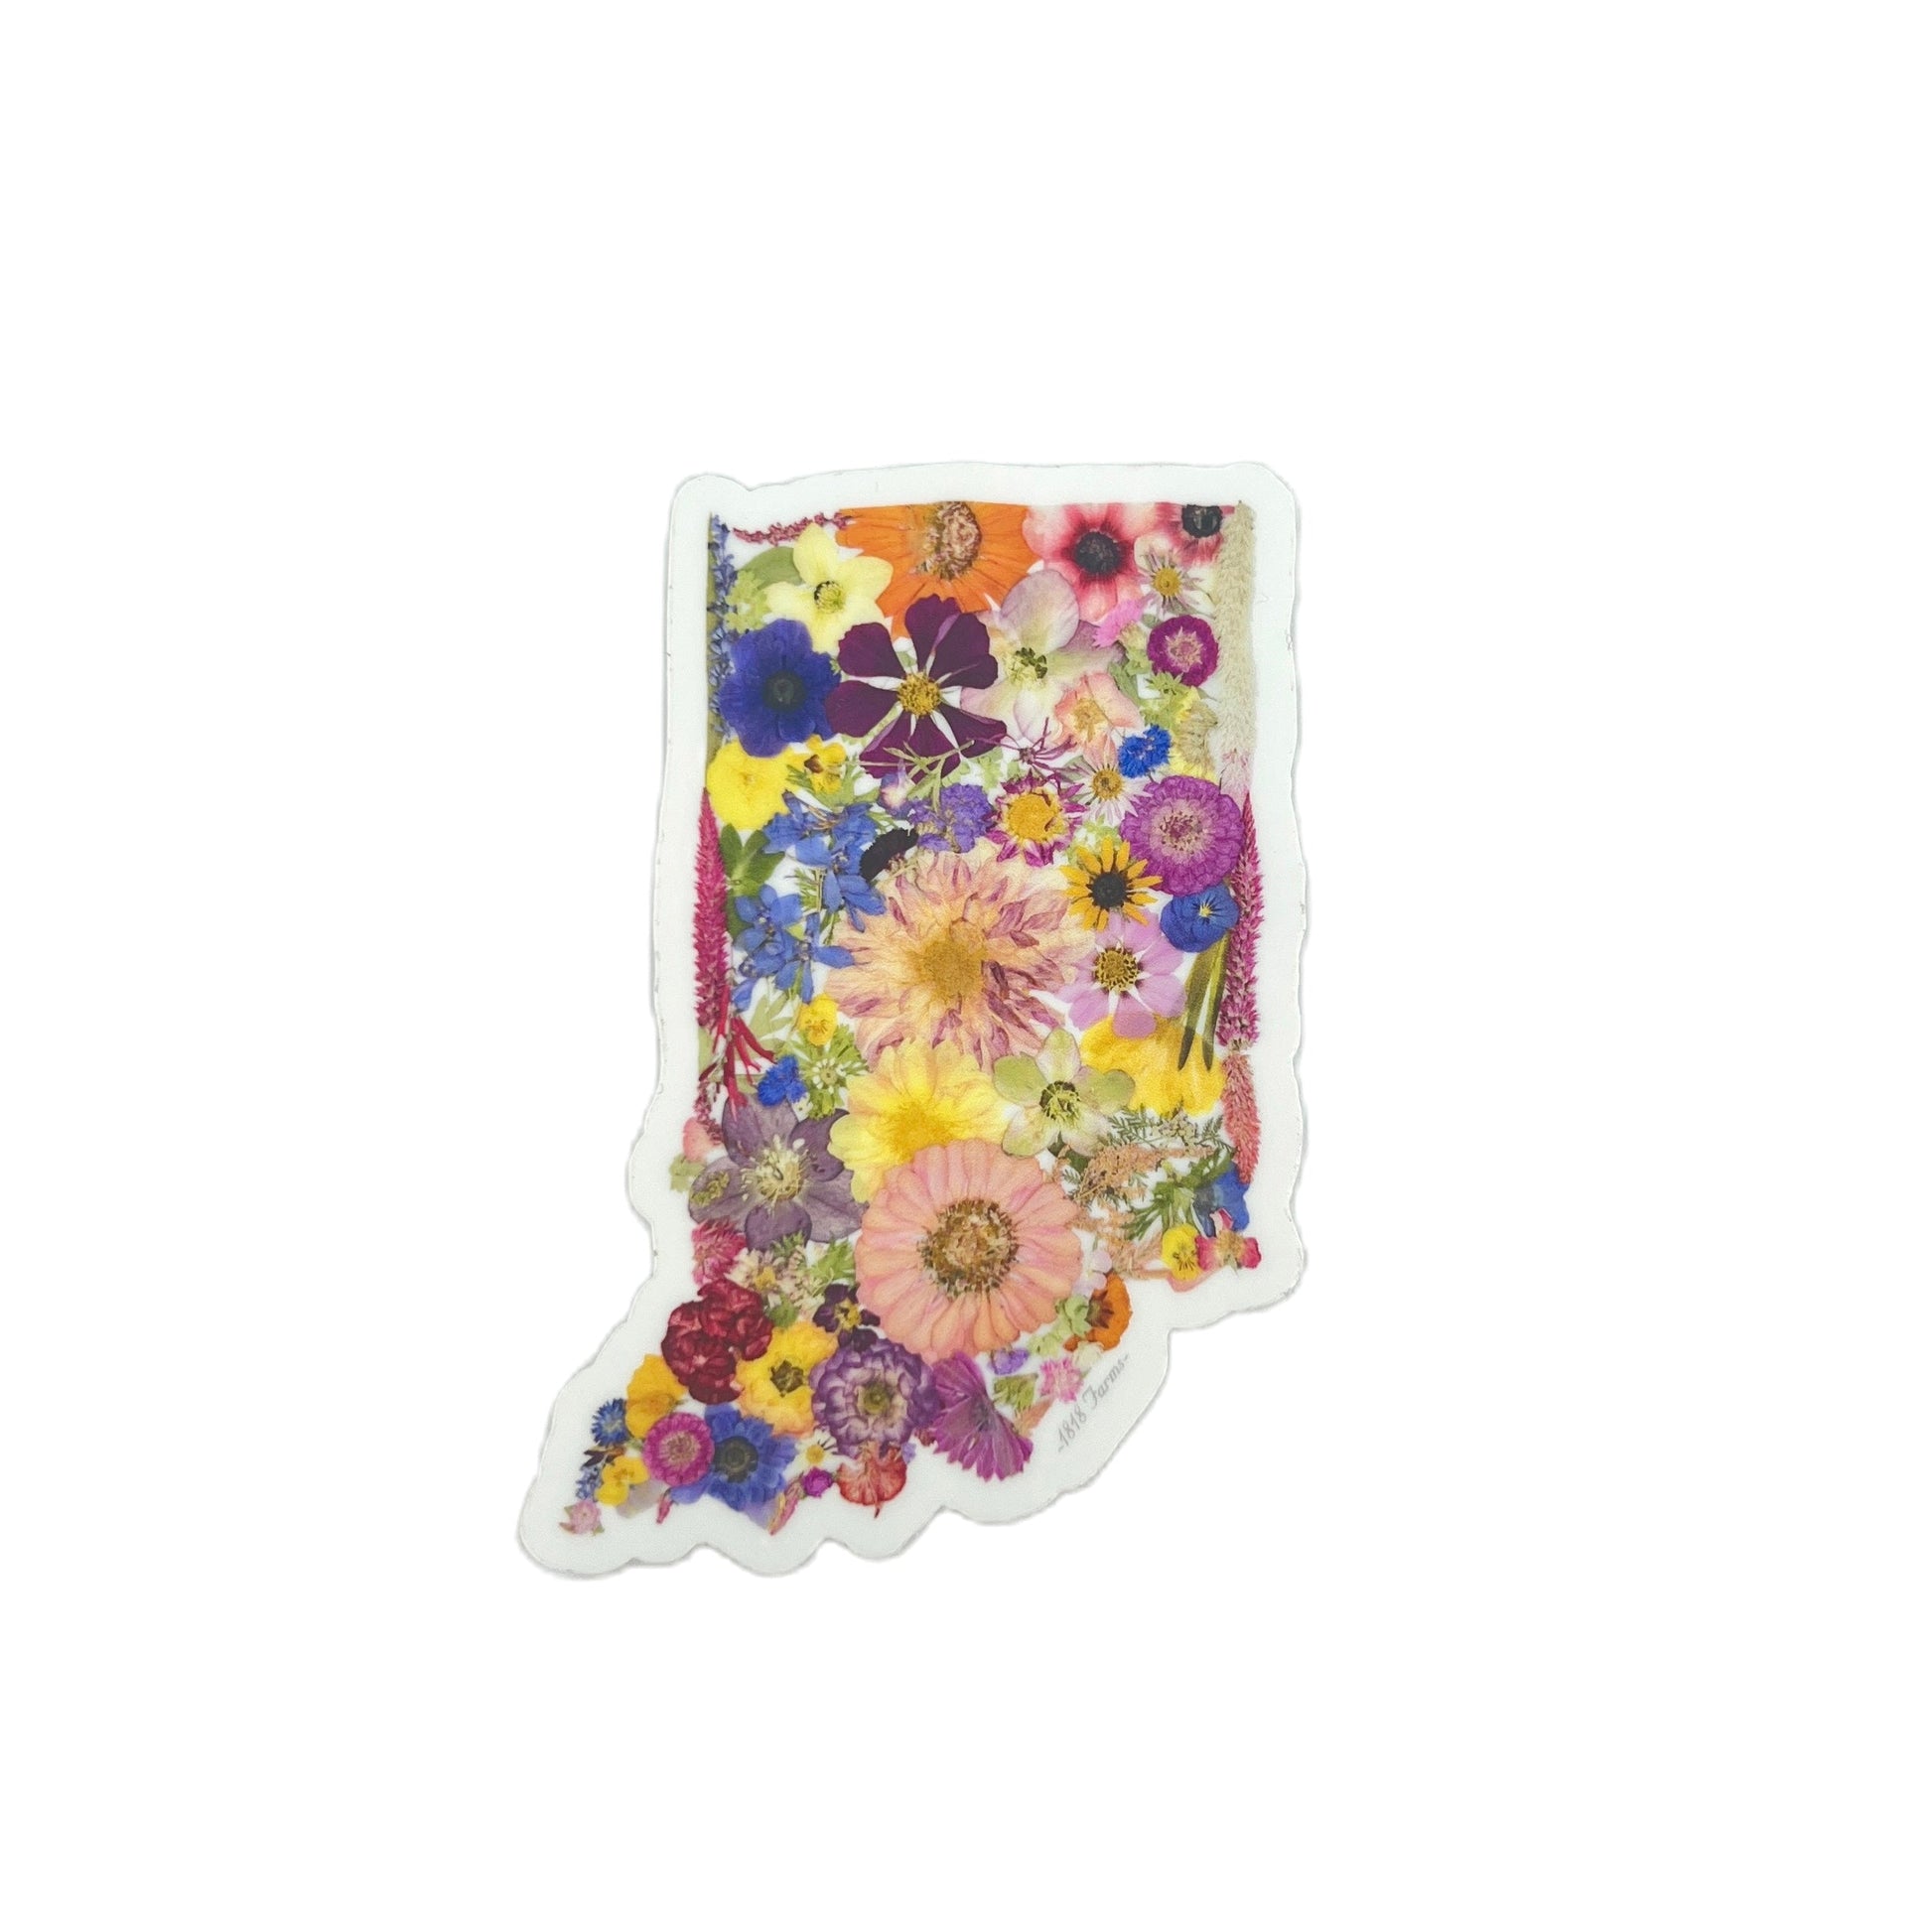 State Themed Vinyl Sticker  - "Where I Bloom" Collection Vinyl Sticker 1818 Farms Indiana  